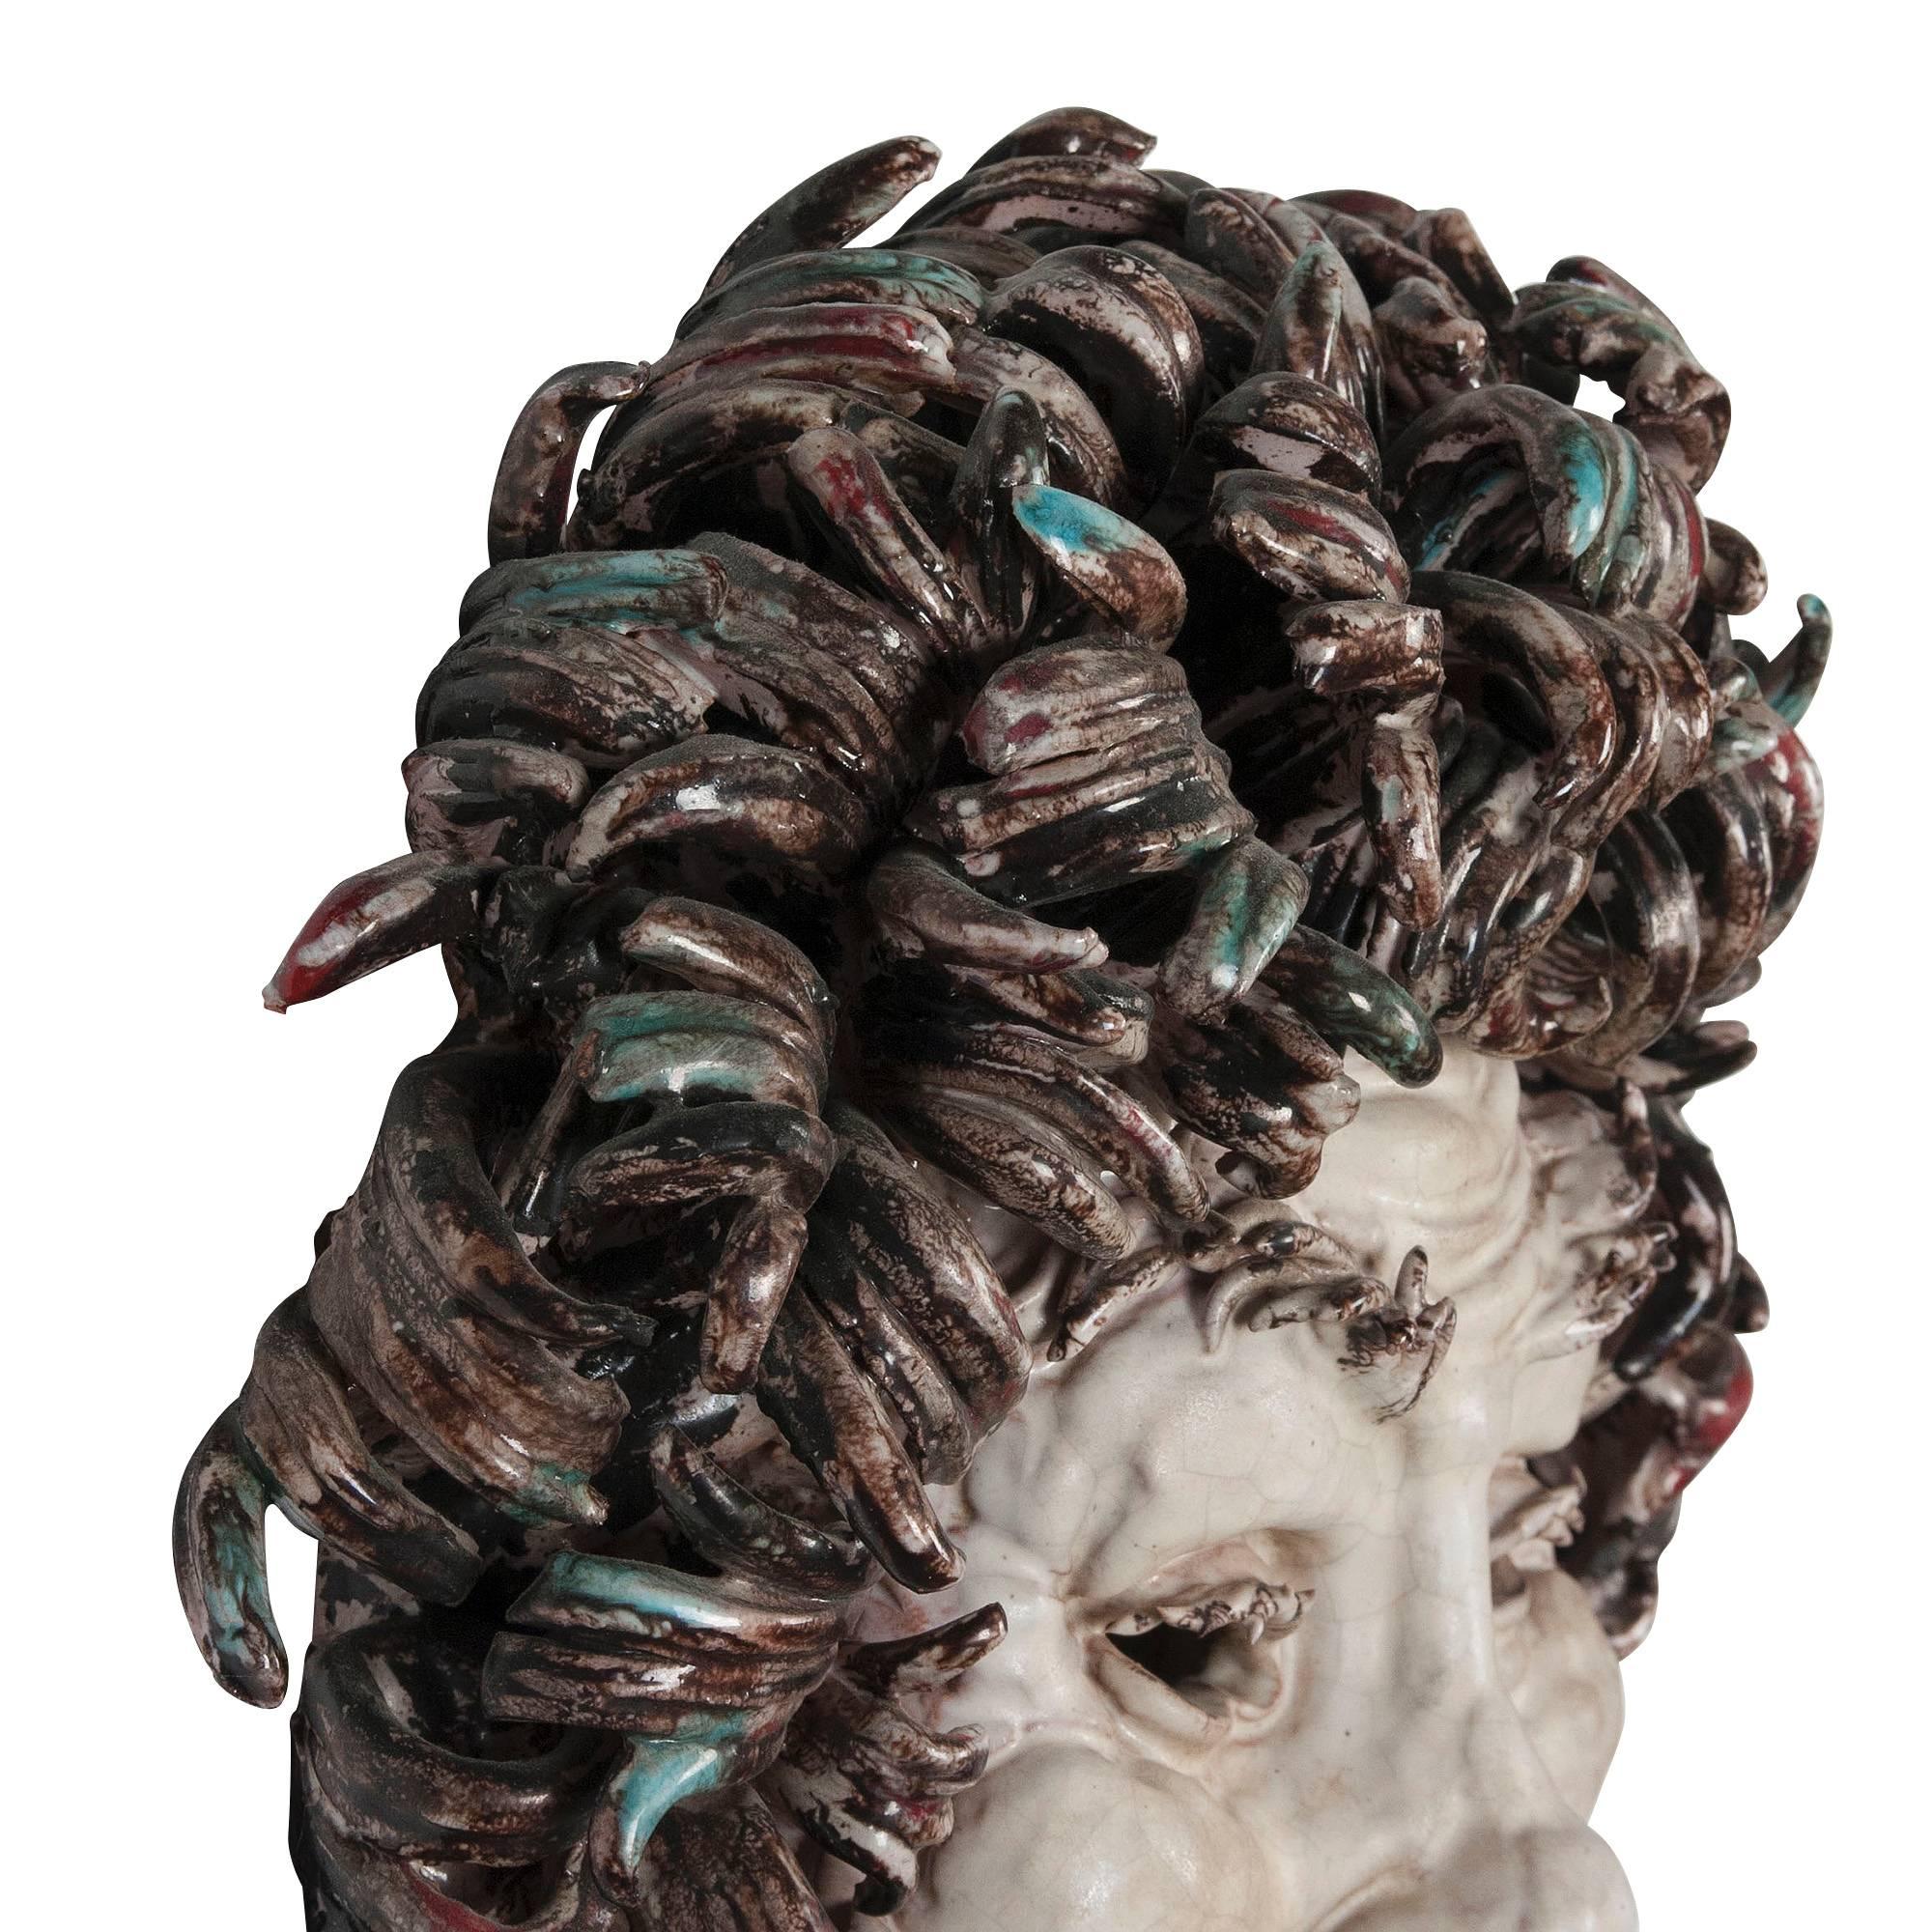 Joyfully expressive glazed ceramic head, pale white face, brown curly hair, open mouth, by Eugenio Pattarino (b.1885-1971), Italian, 1940s. Signed to backside. Measures: Height 12 in, width 11 in, depth 4 in. (Item #1990)